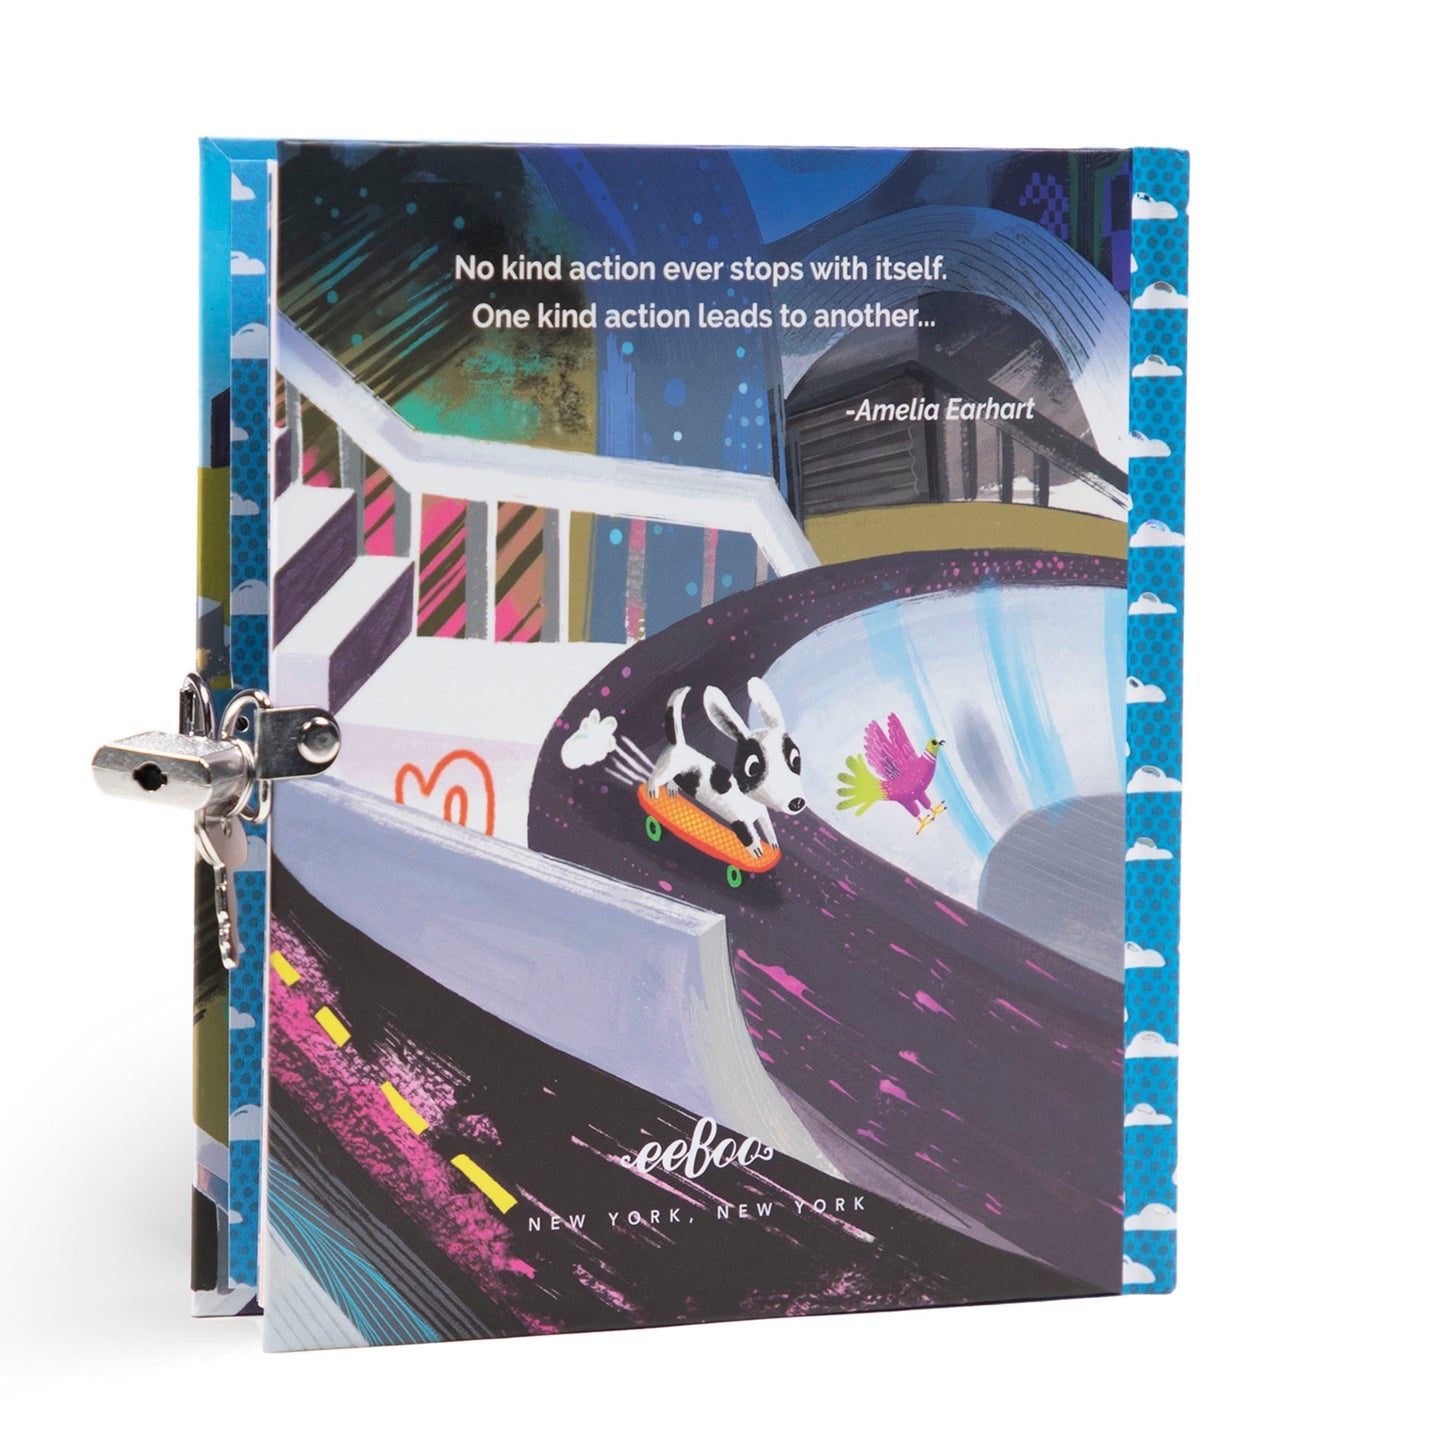 eeBoo's Female Skateboarders Journal Diary with dogs, pigeons and the city beyond. Great gift